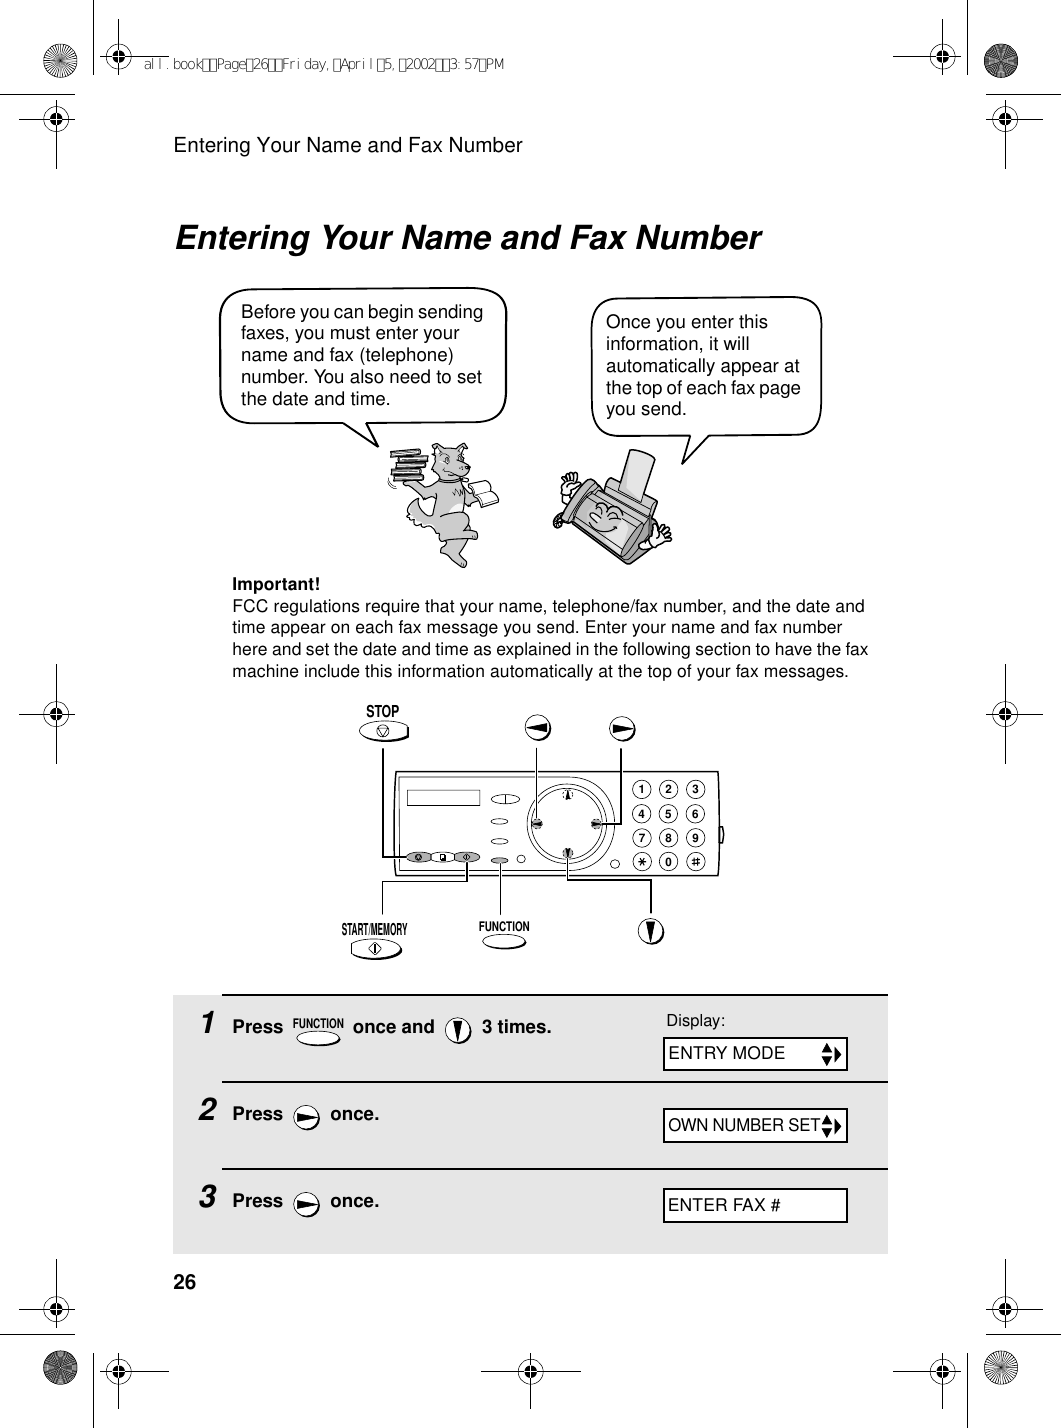 Entering Your Name and Fax Number26Entering Your Name and Fax NumberOnce you enter this information, it will automatically appear at the top of each fax page you send.Before you can begin sending faxes, you must enter your name and fax (telephone) number. You also need to set the date and time. FUNCTIONSTART/MEMORYSTOPImportant!FCC regulations require that your name, telephone/fax number, and the date and time appear on each fax message you send. Enter your name and fax number here and set the date and time as explained in the following section to have the fax machine include this information automatically at the top of your fax messages.1Press   once and   3 times.2Press  once.3Press  once.FUNCTION1945 67802 3Display:ENTER FAX #ENTRY MODEOWN NUMBER SETall.bookPage26Friday,April5,20023:57PM